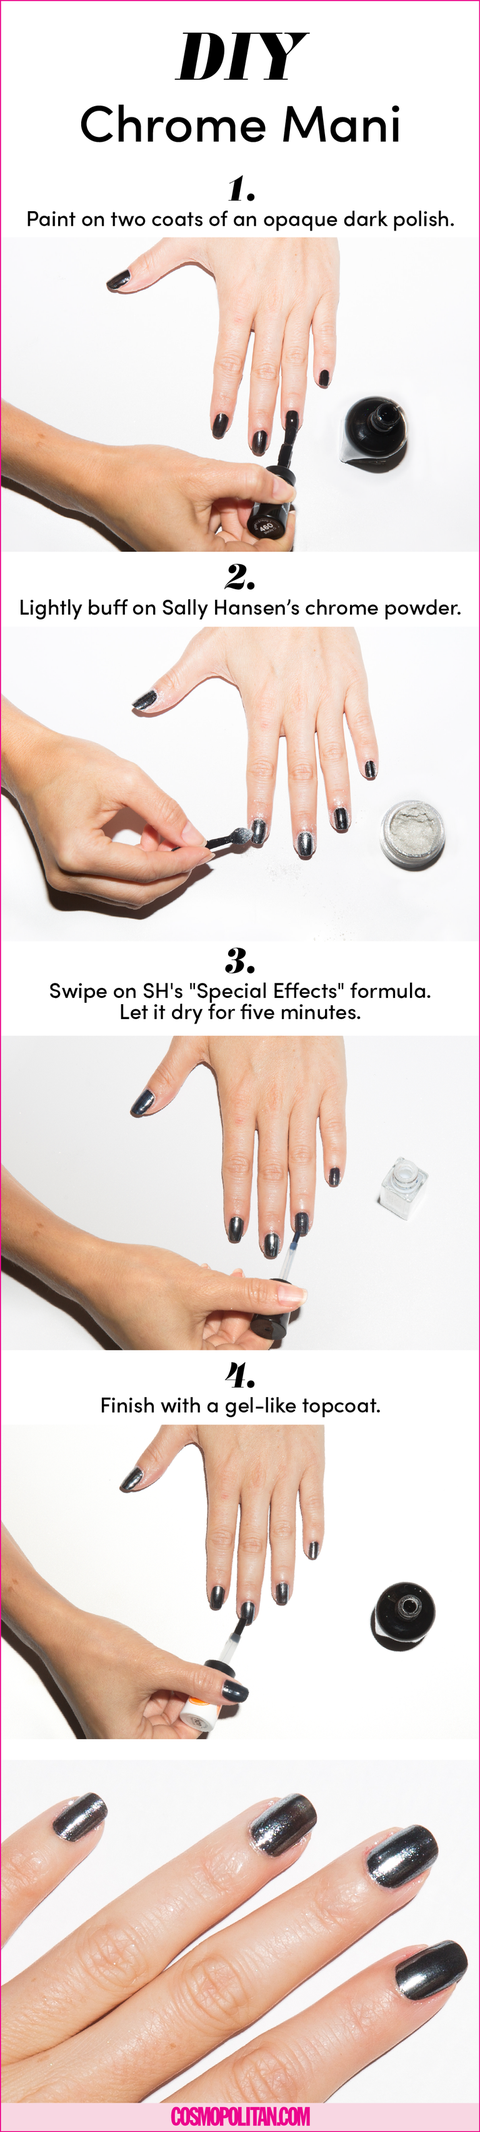 Sally Hansen's Chrome Nail Kits - Reviewed by Cosmo